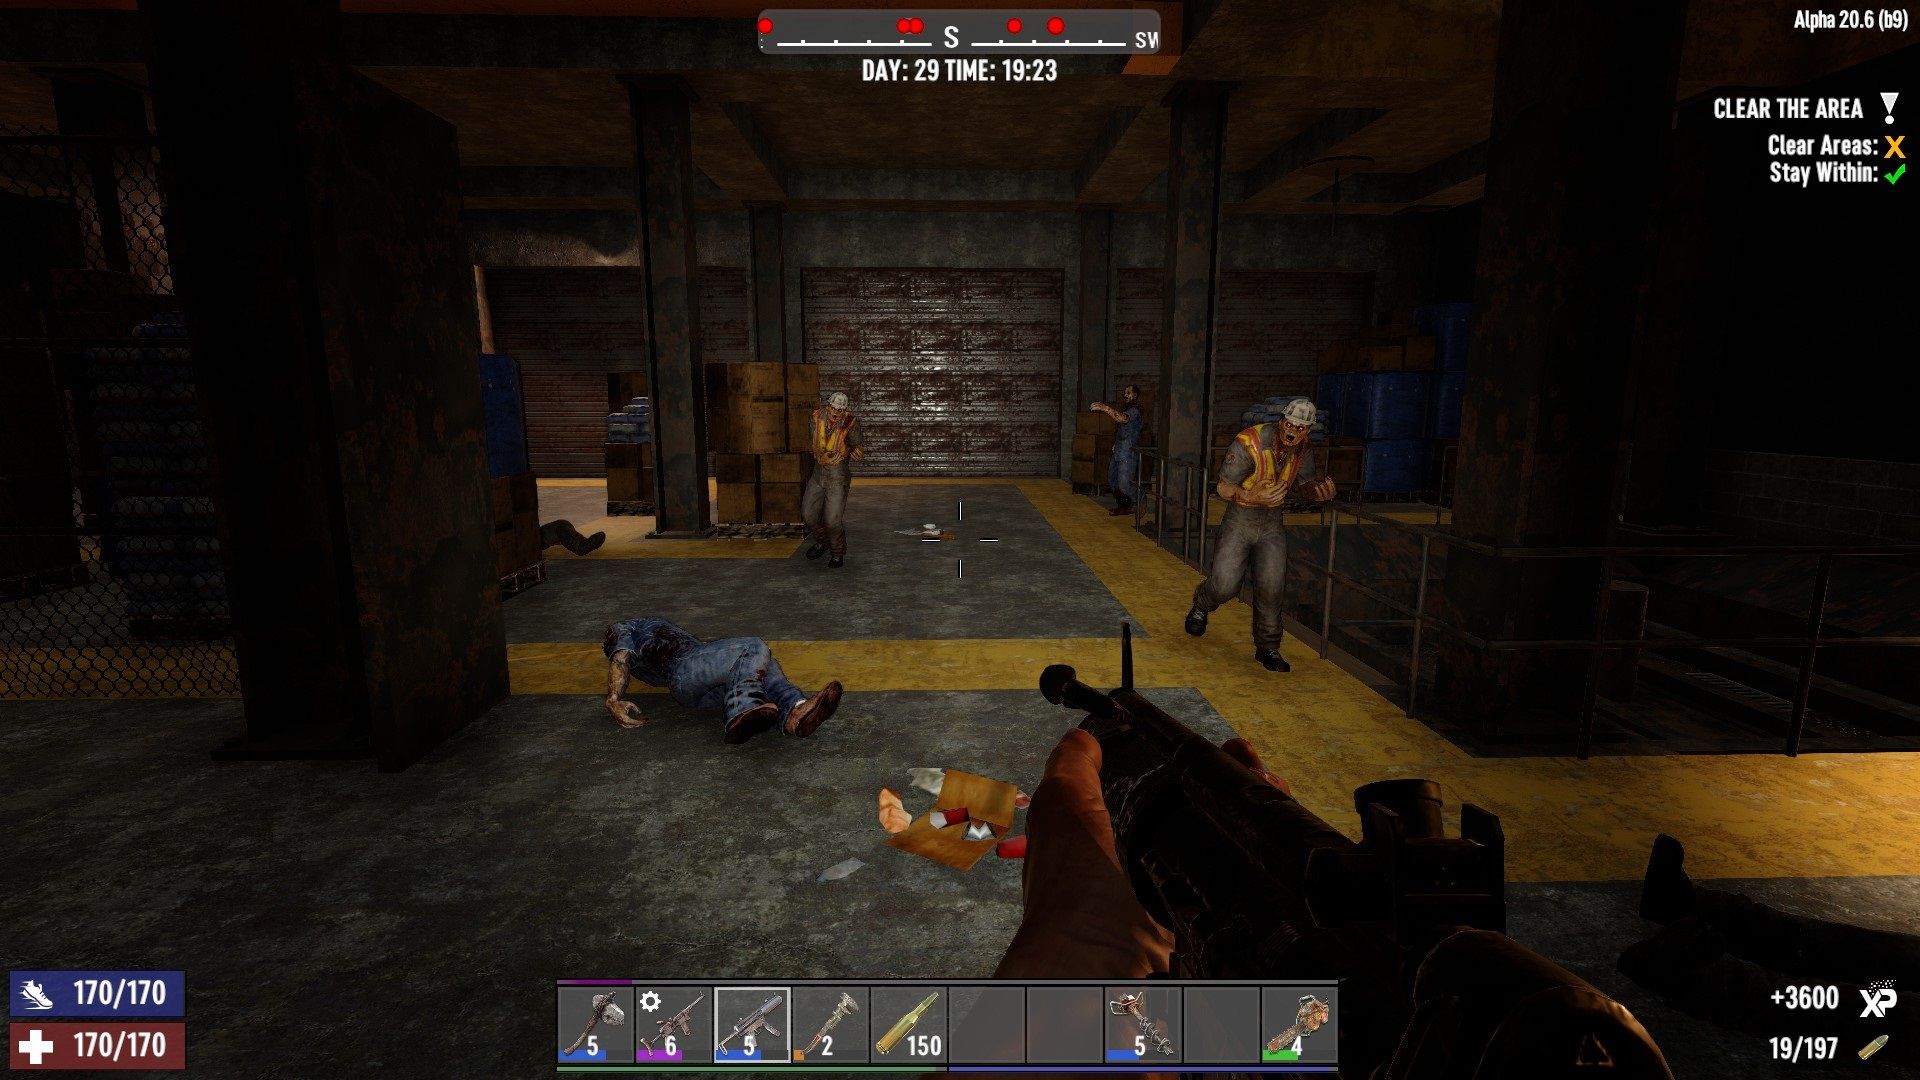 zombies attacking me and using a lot of ammo Shotgun Messiah 7 Days To Die.jpg